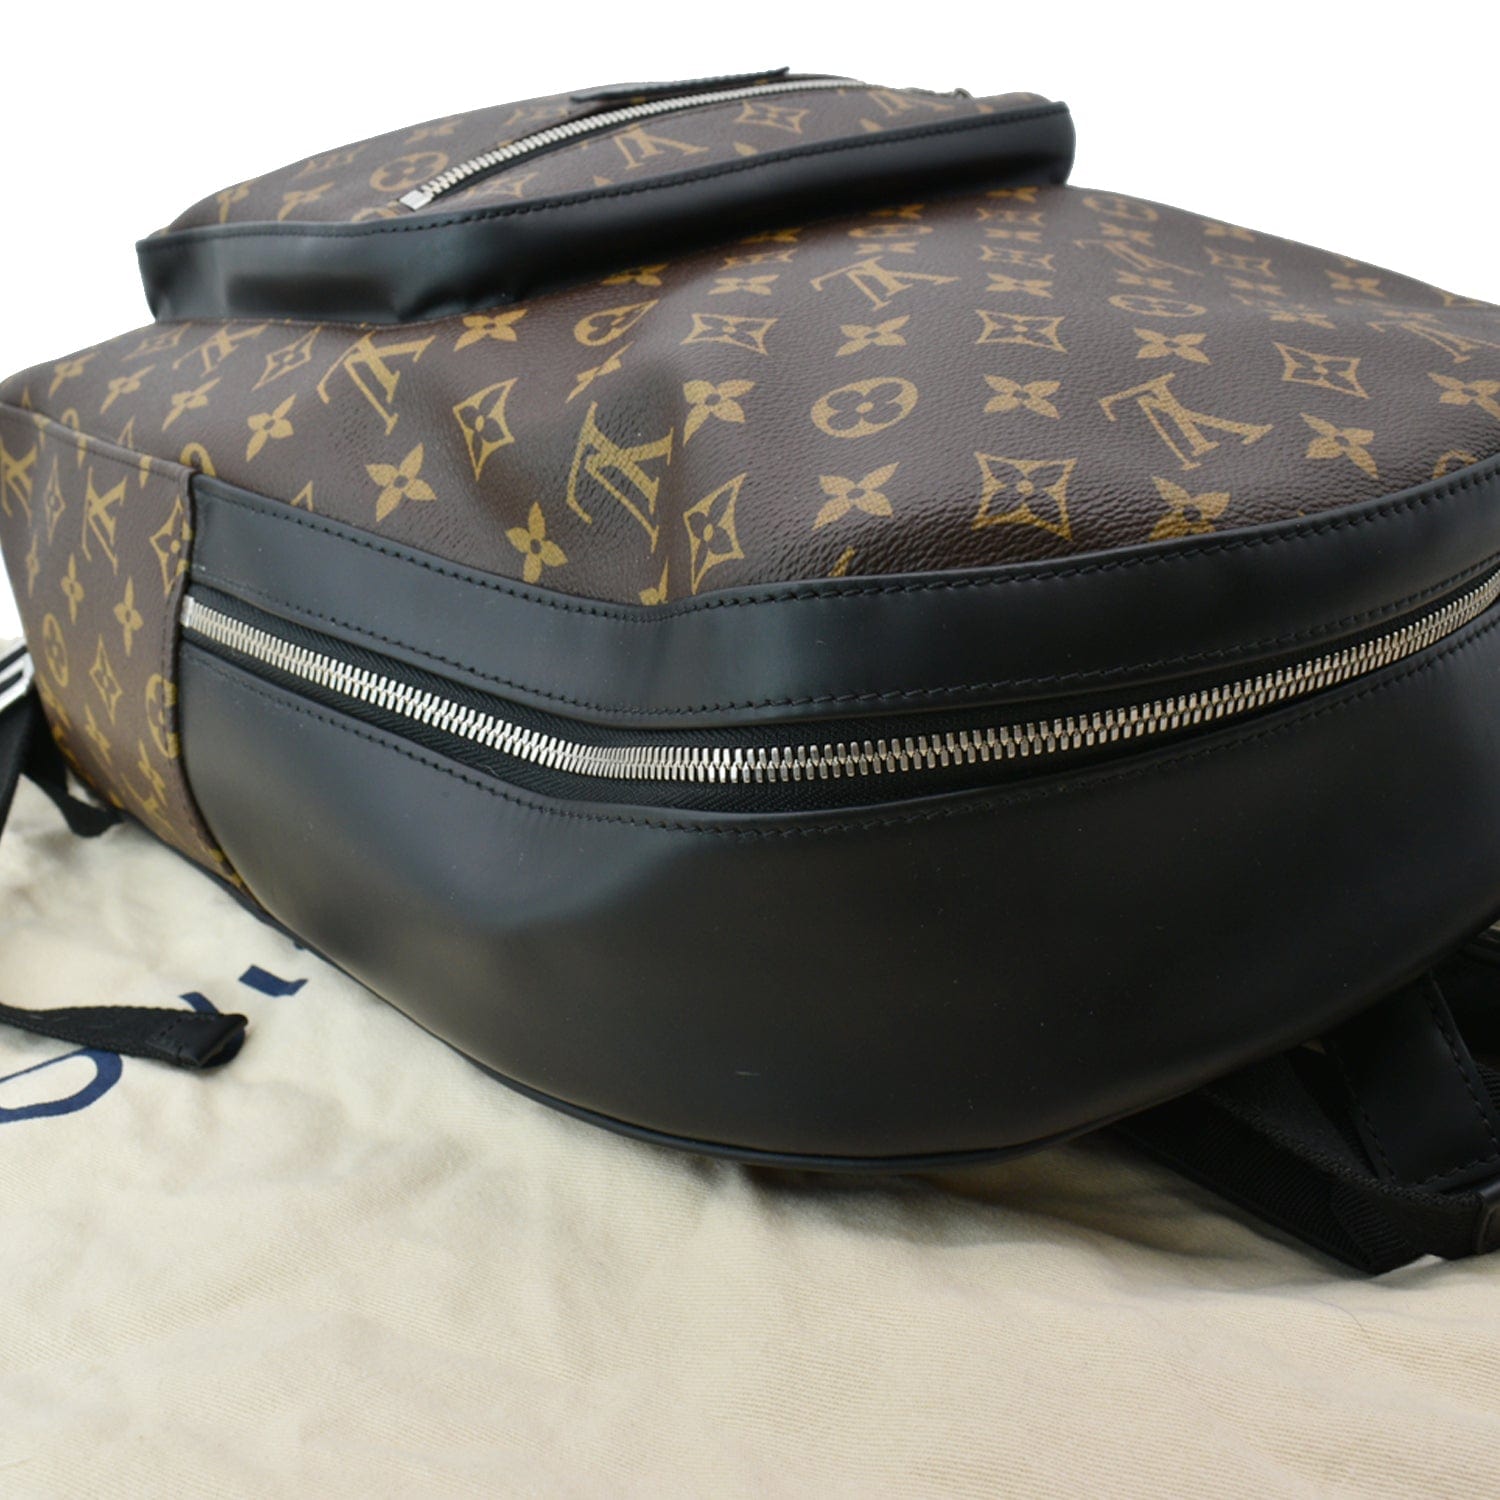 LOUIS VUITTON Brown Monogram Coated Canvas and Black Leather Josh